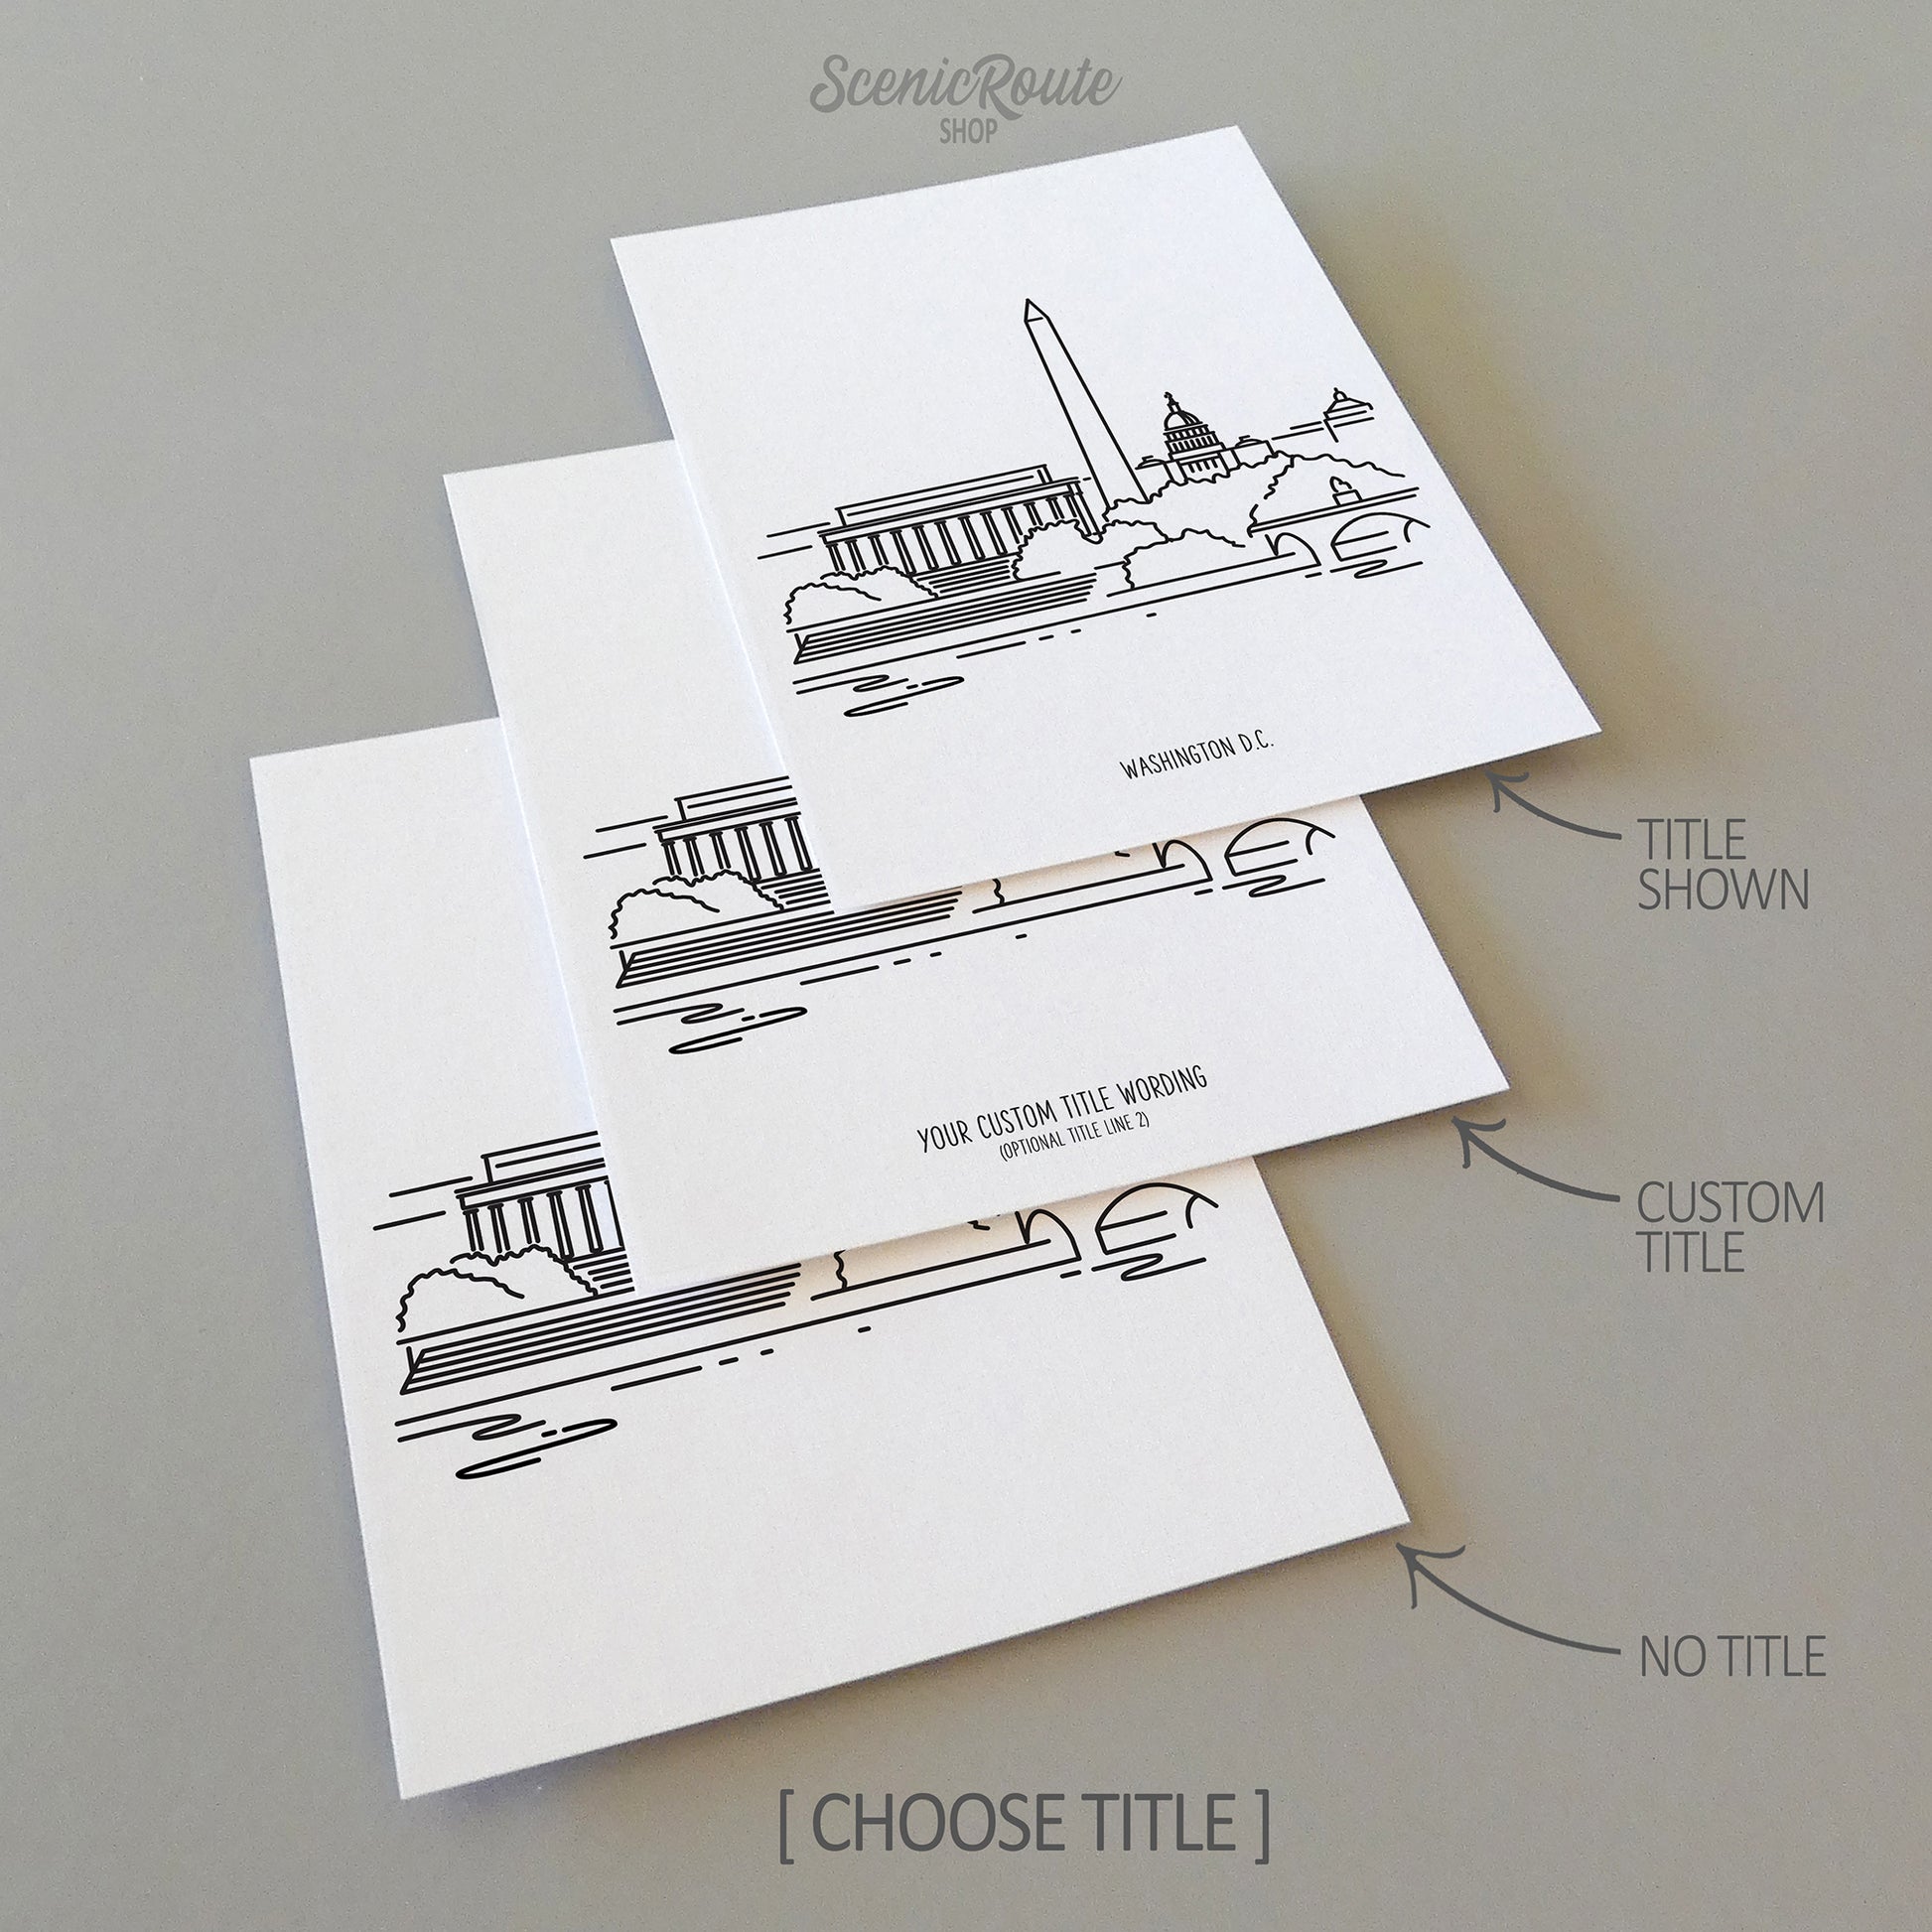 Three line art drawings of the Washington DC Skyline on white linen paper with a gray background. The pieces are shown with title options that can be chosen and personalized.